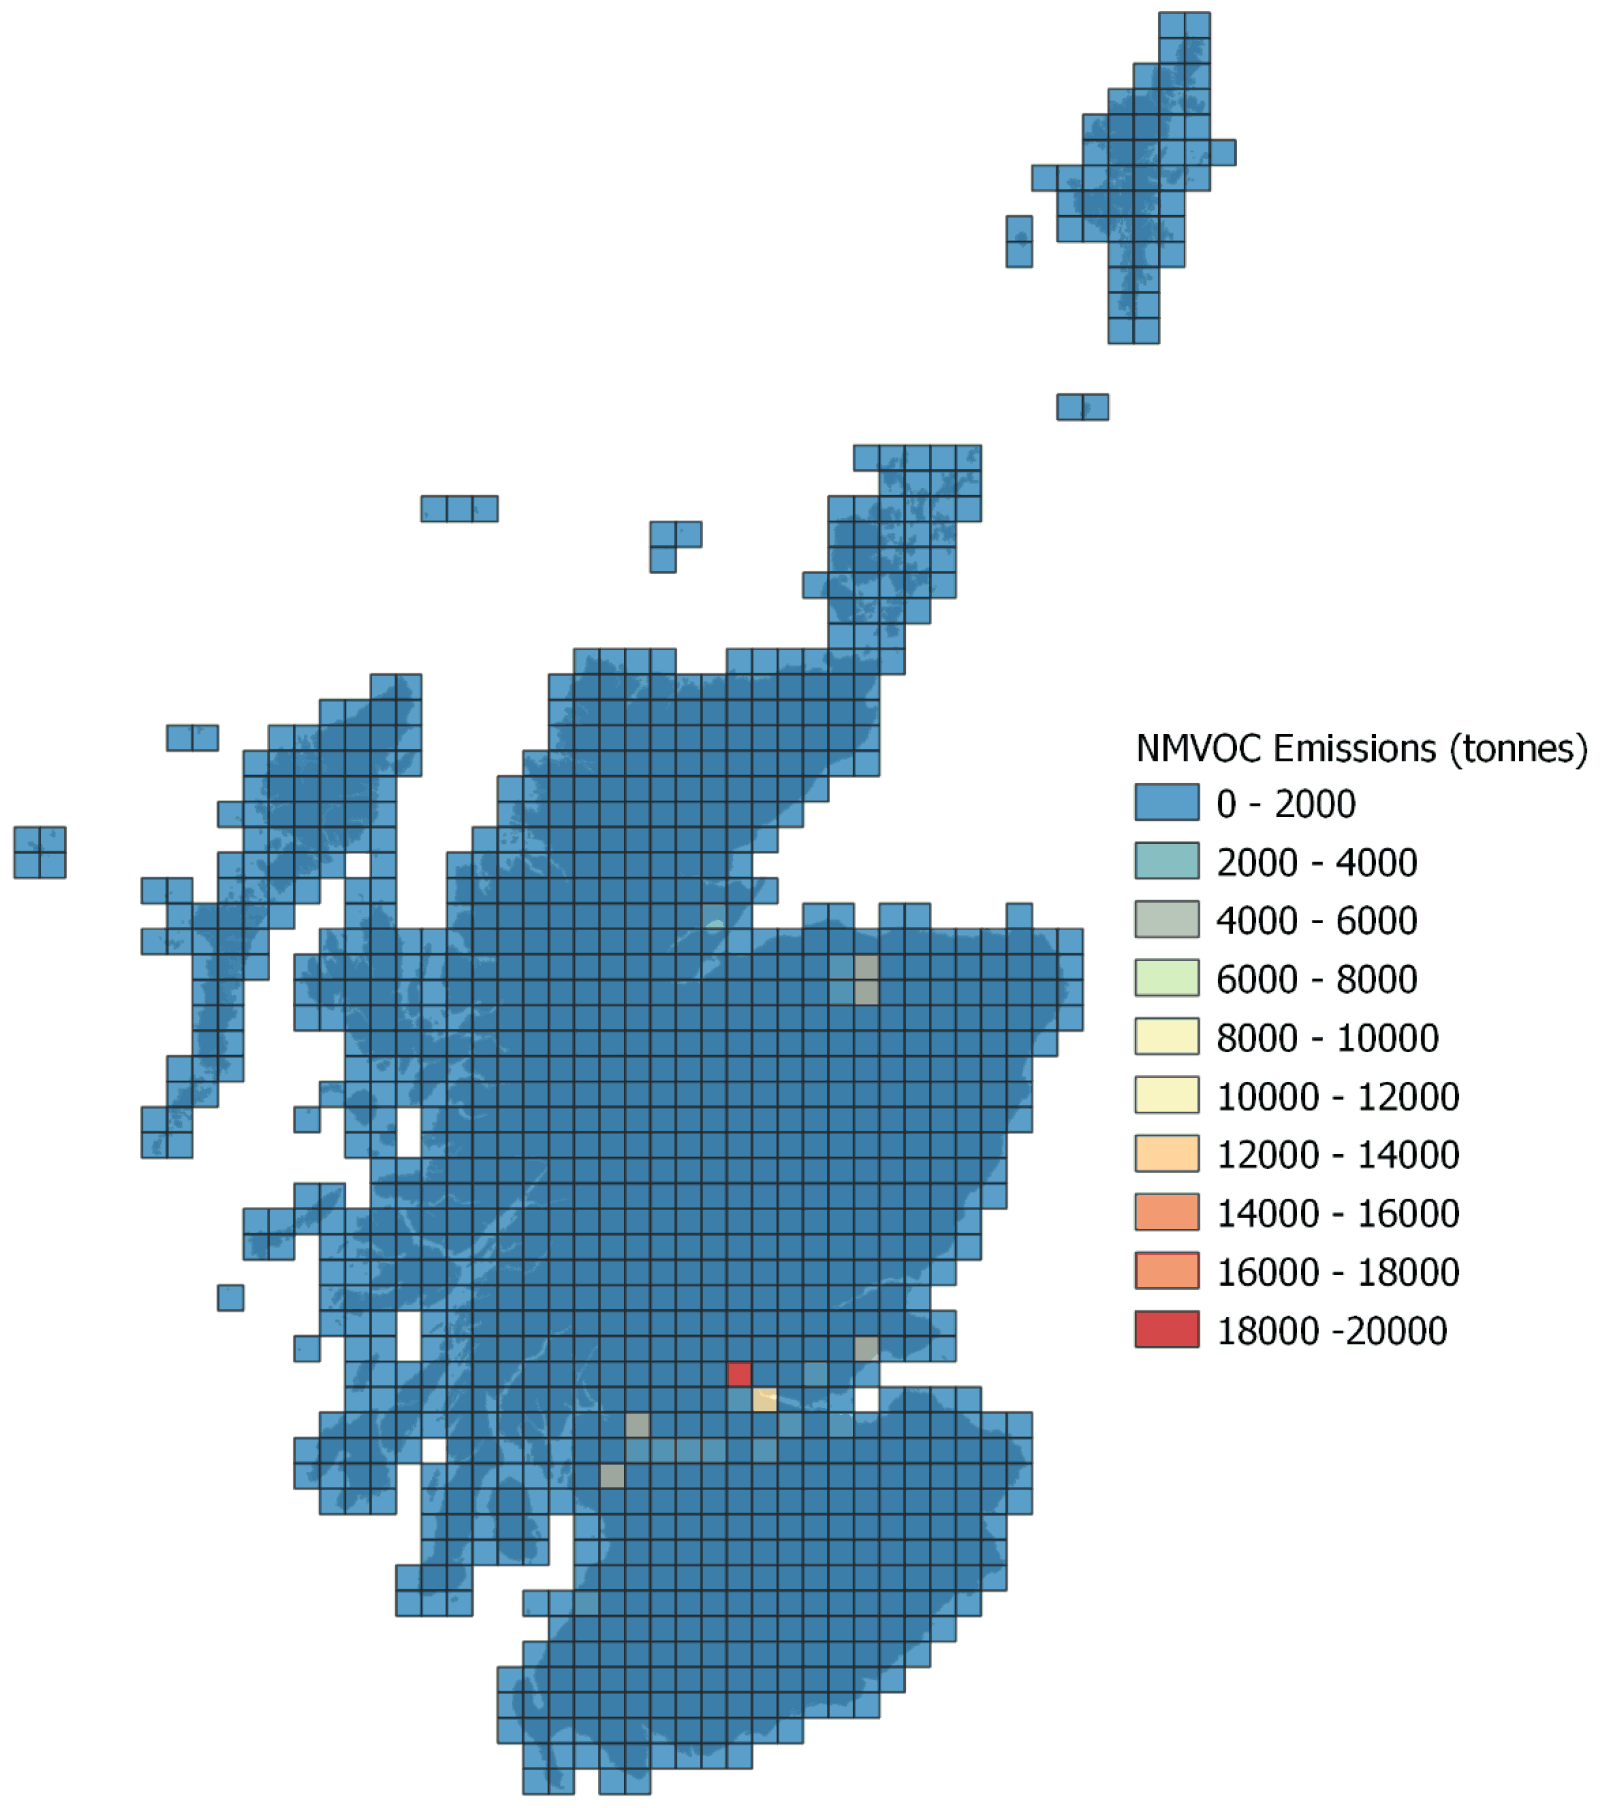 Scotland divided into 10 km x 10 km grid squares showing total NMVOC emissions in each grid square.